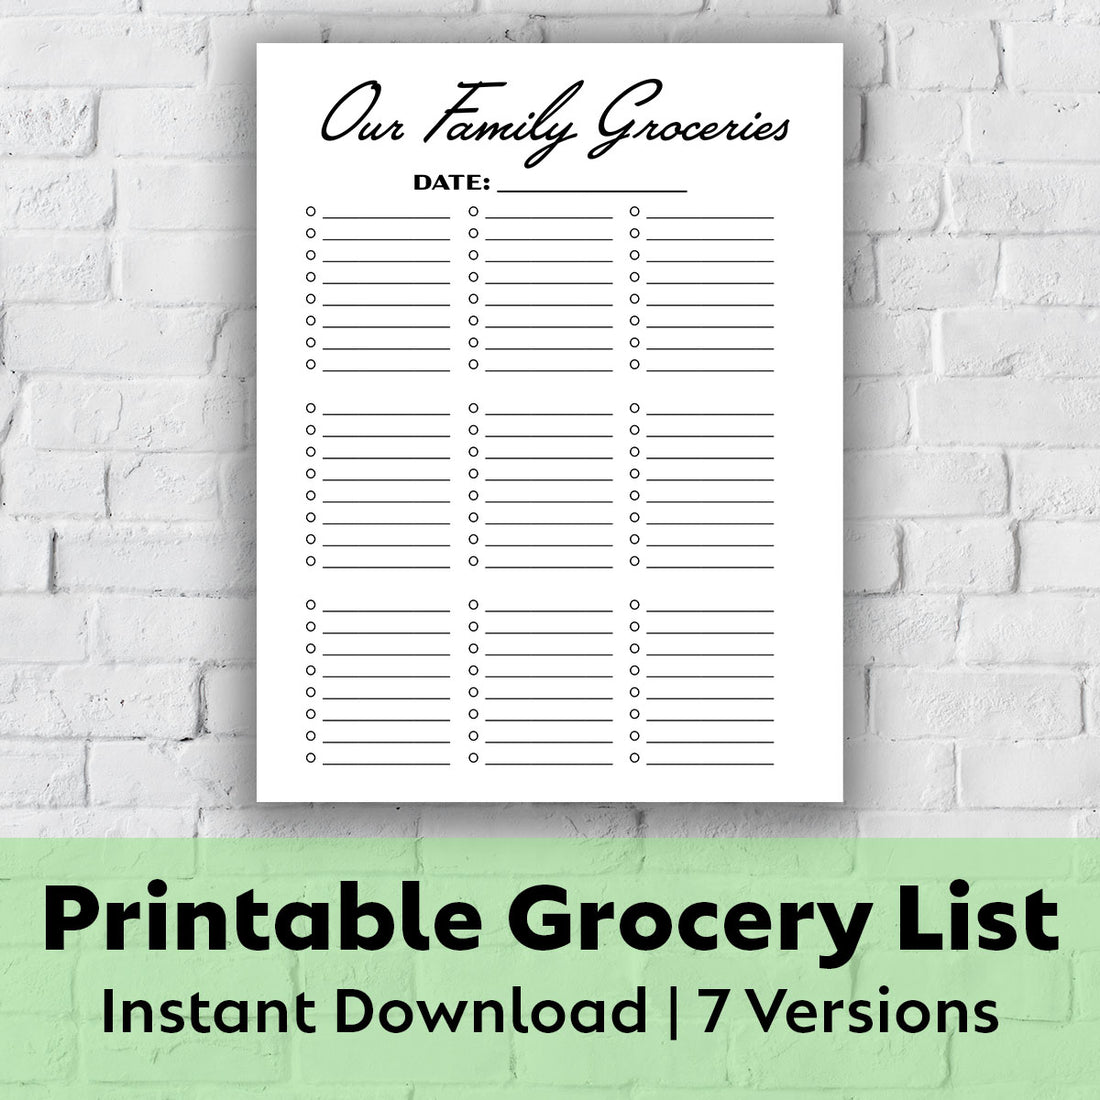 Printable Grocery List - Our Family Groceries